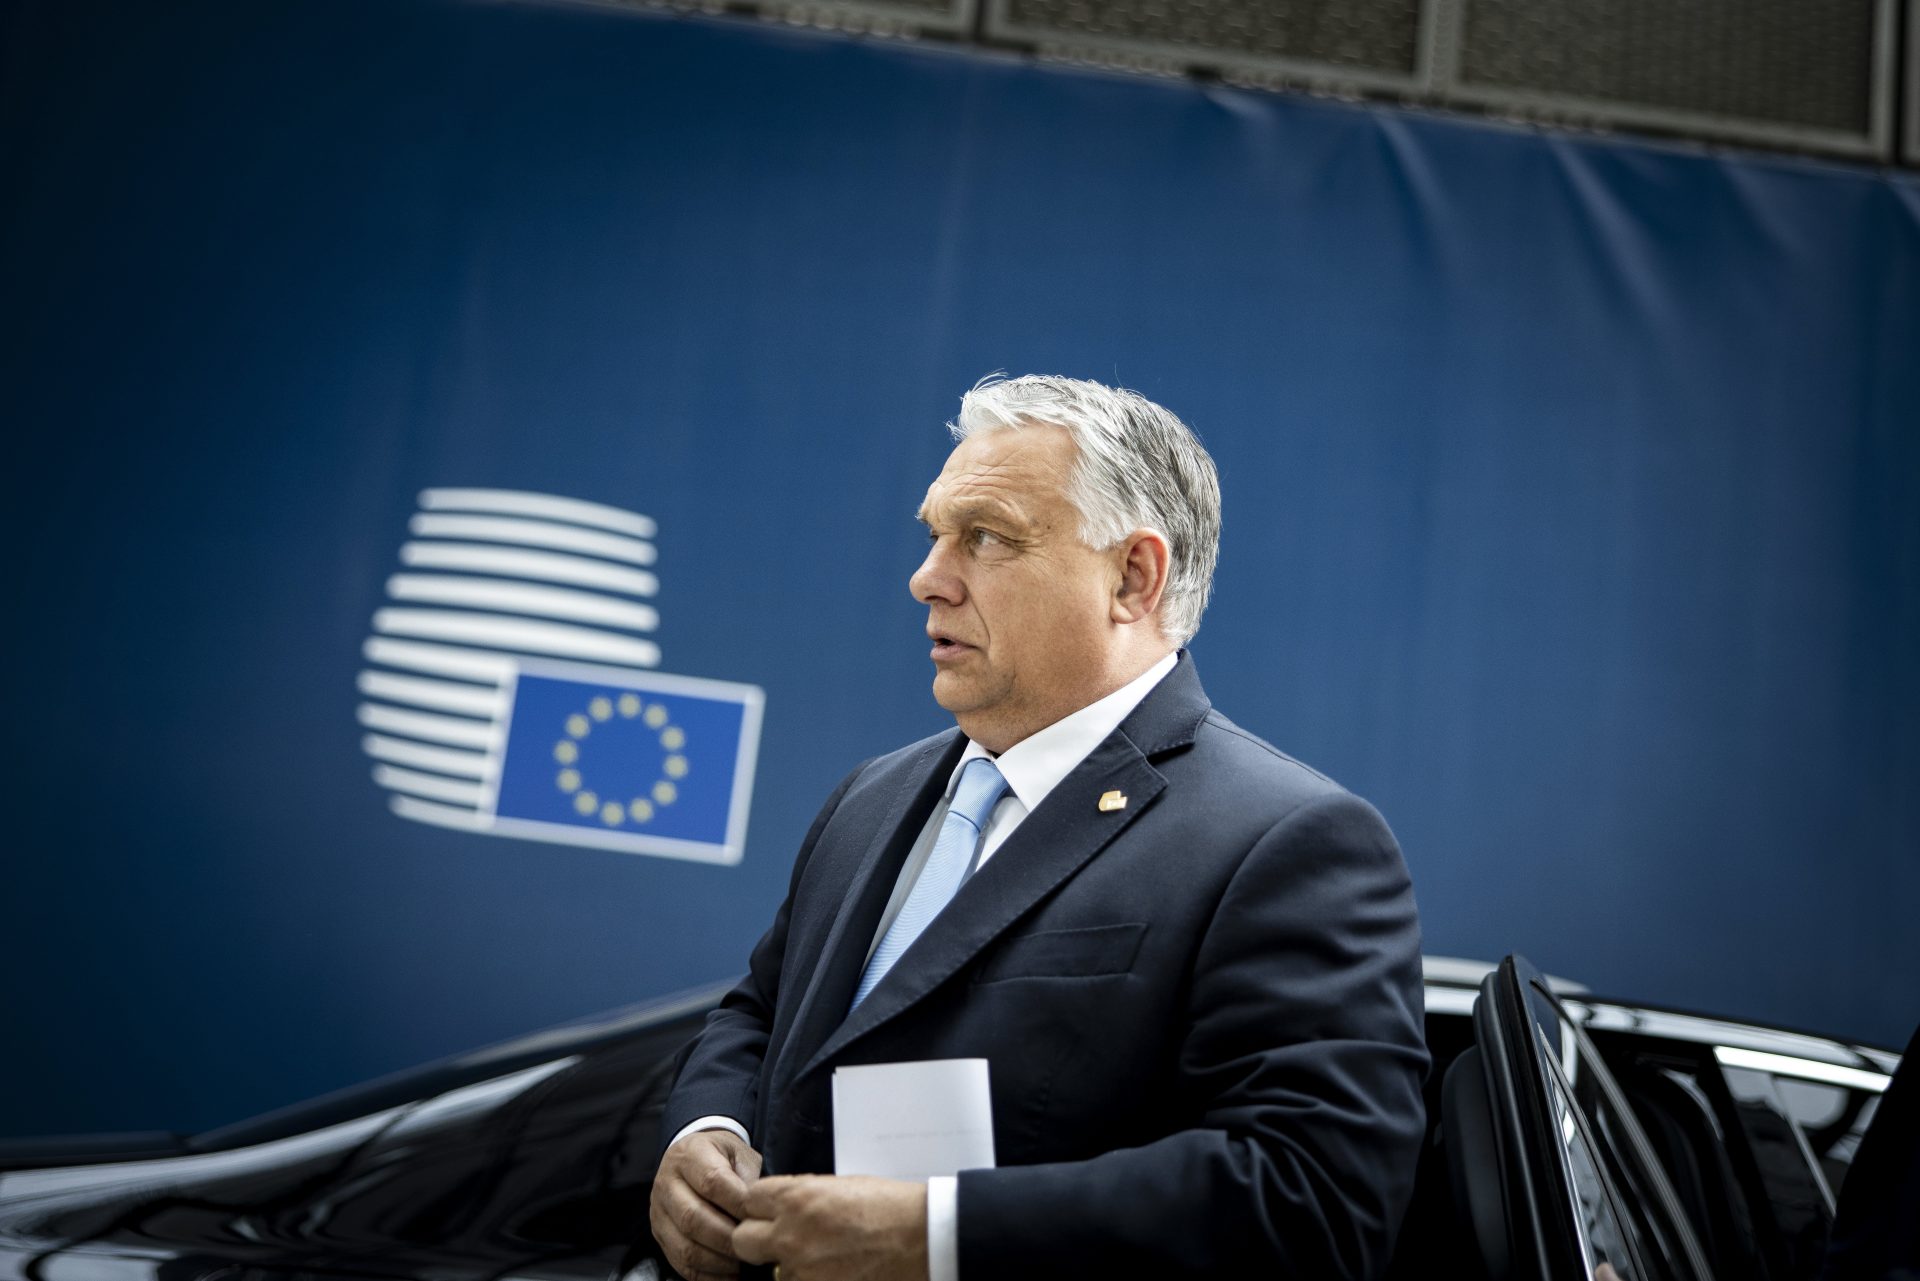 Serious Challenges in European Politics: Orbán’s Perspective